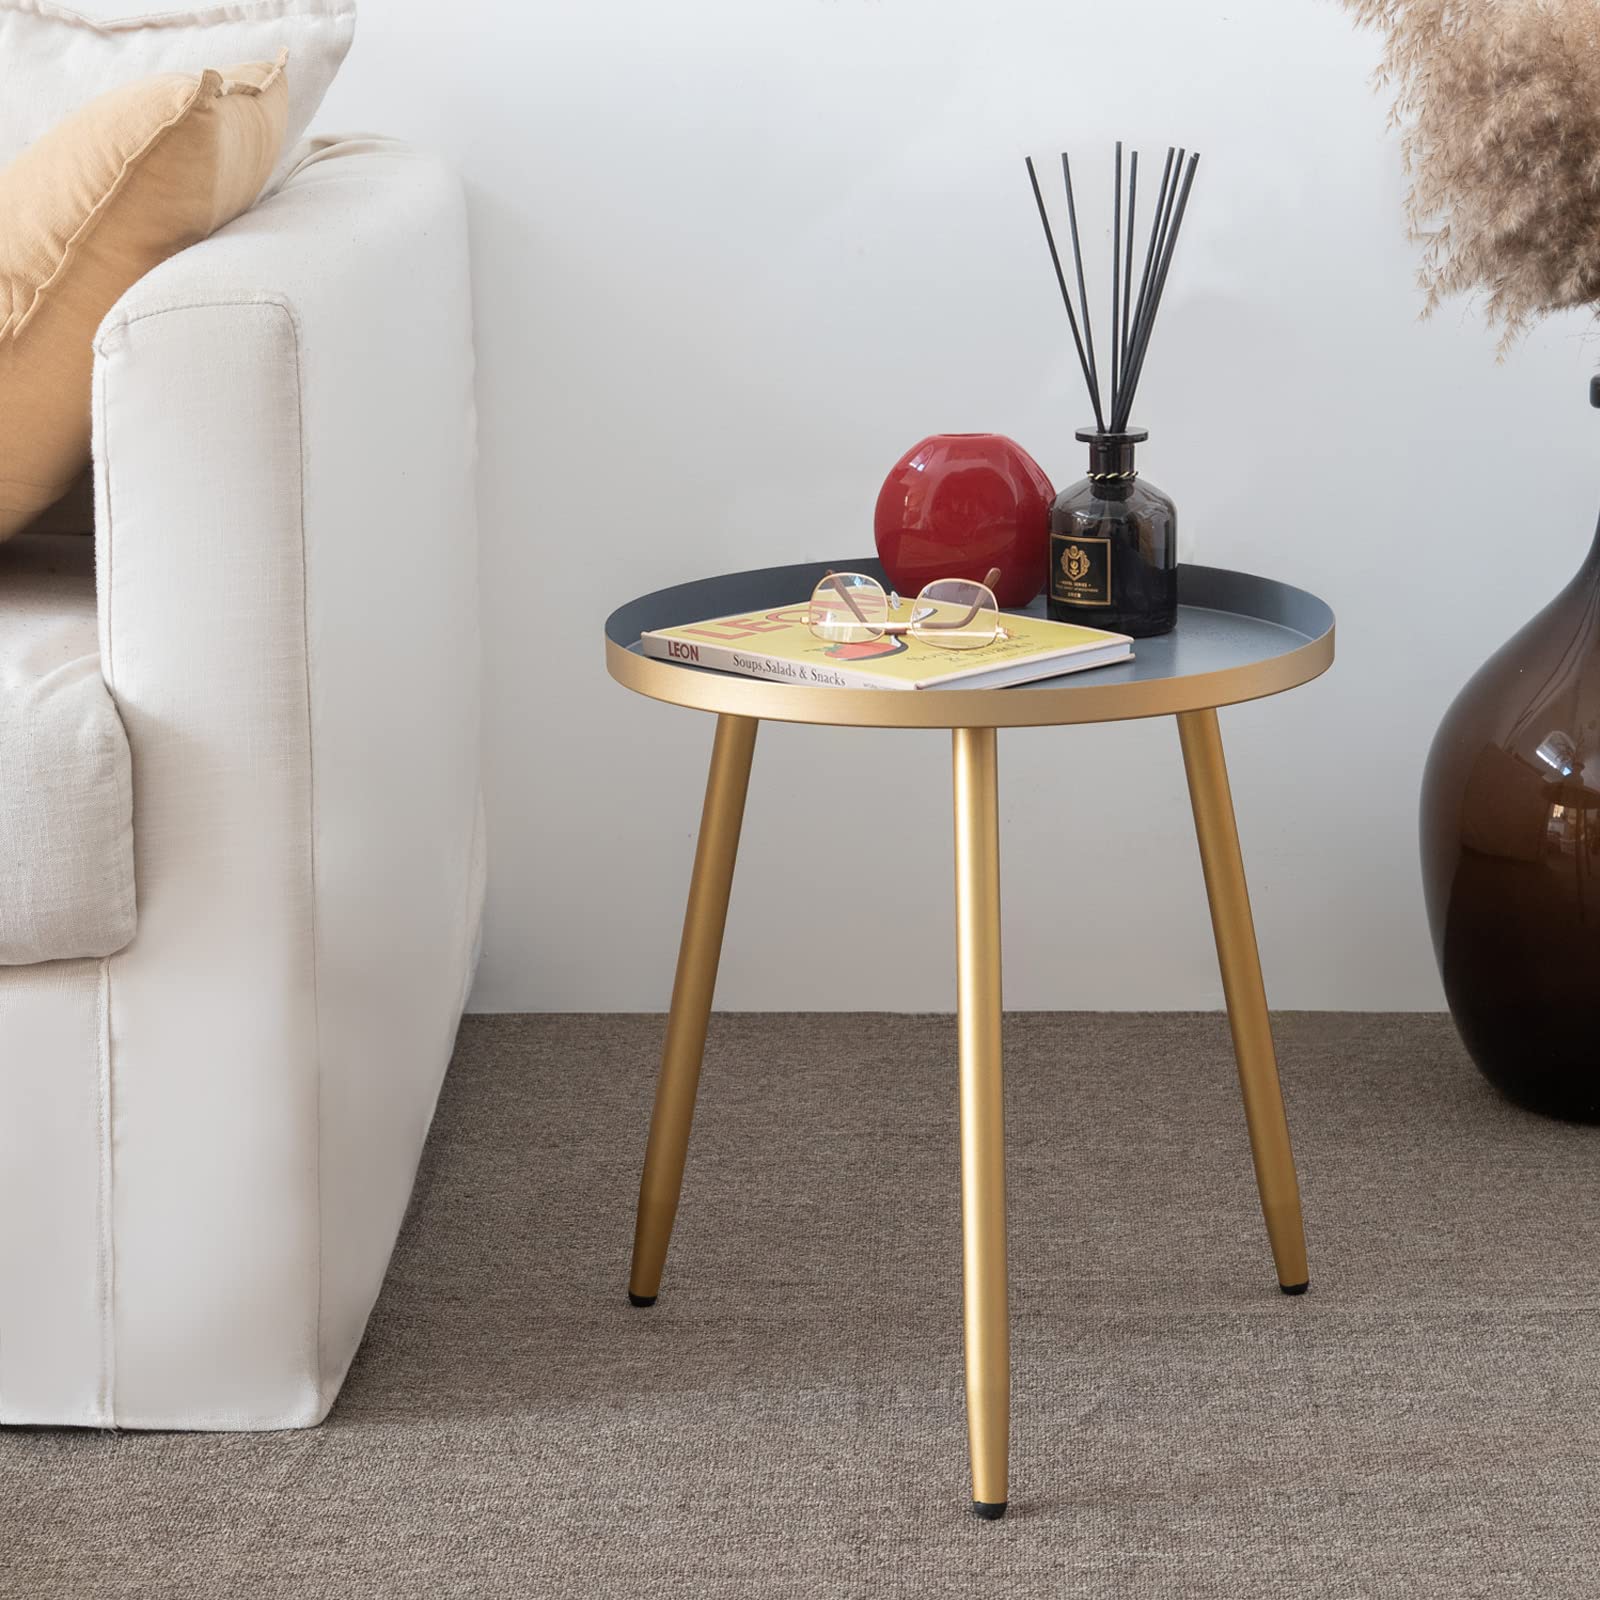 AOJEZOR Round End Table Ideal for Any Room, Metal Structure Side Tables Great For Living Room, Bedroom, Indoor, Outdoor, Matte Gray Tray with 3 Gold Legs Accent $18.21